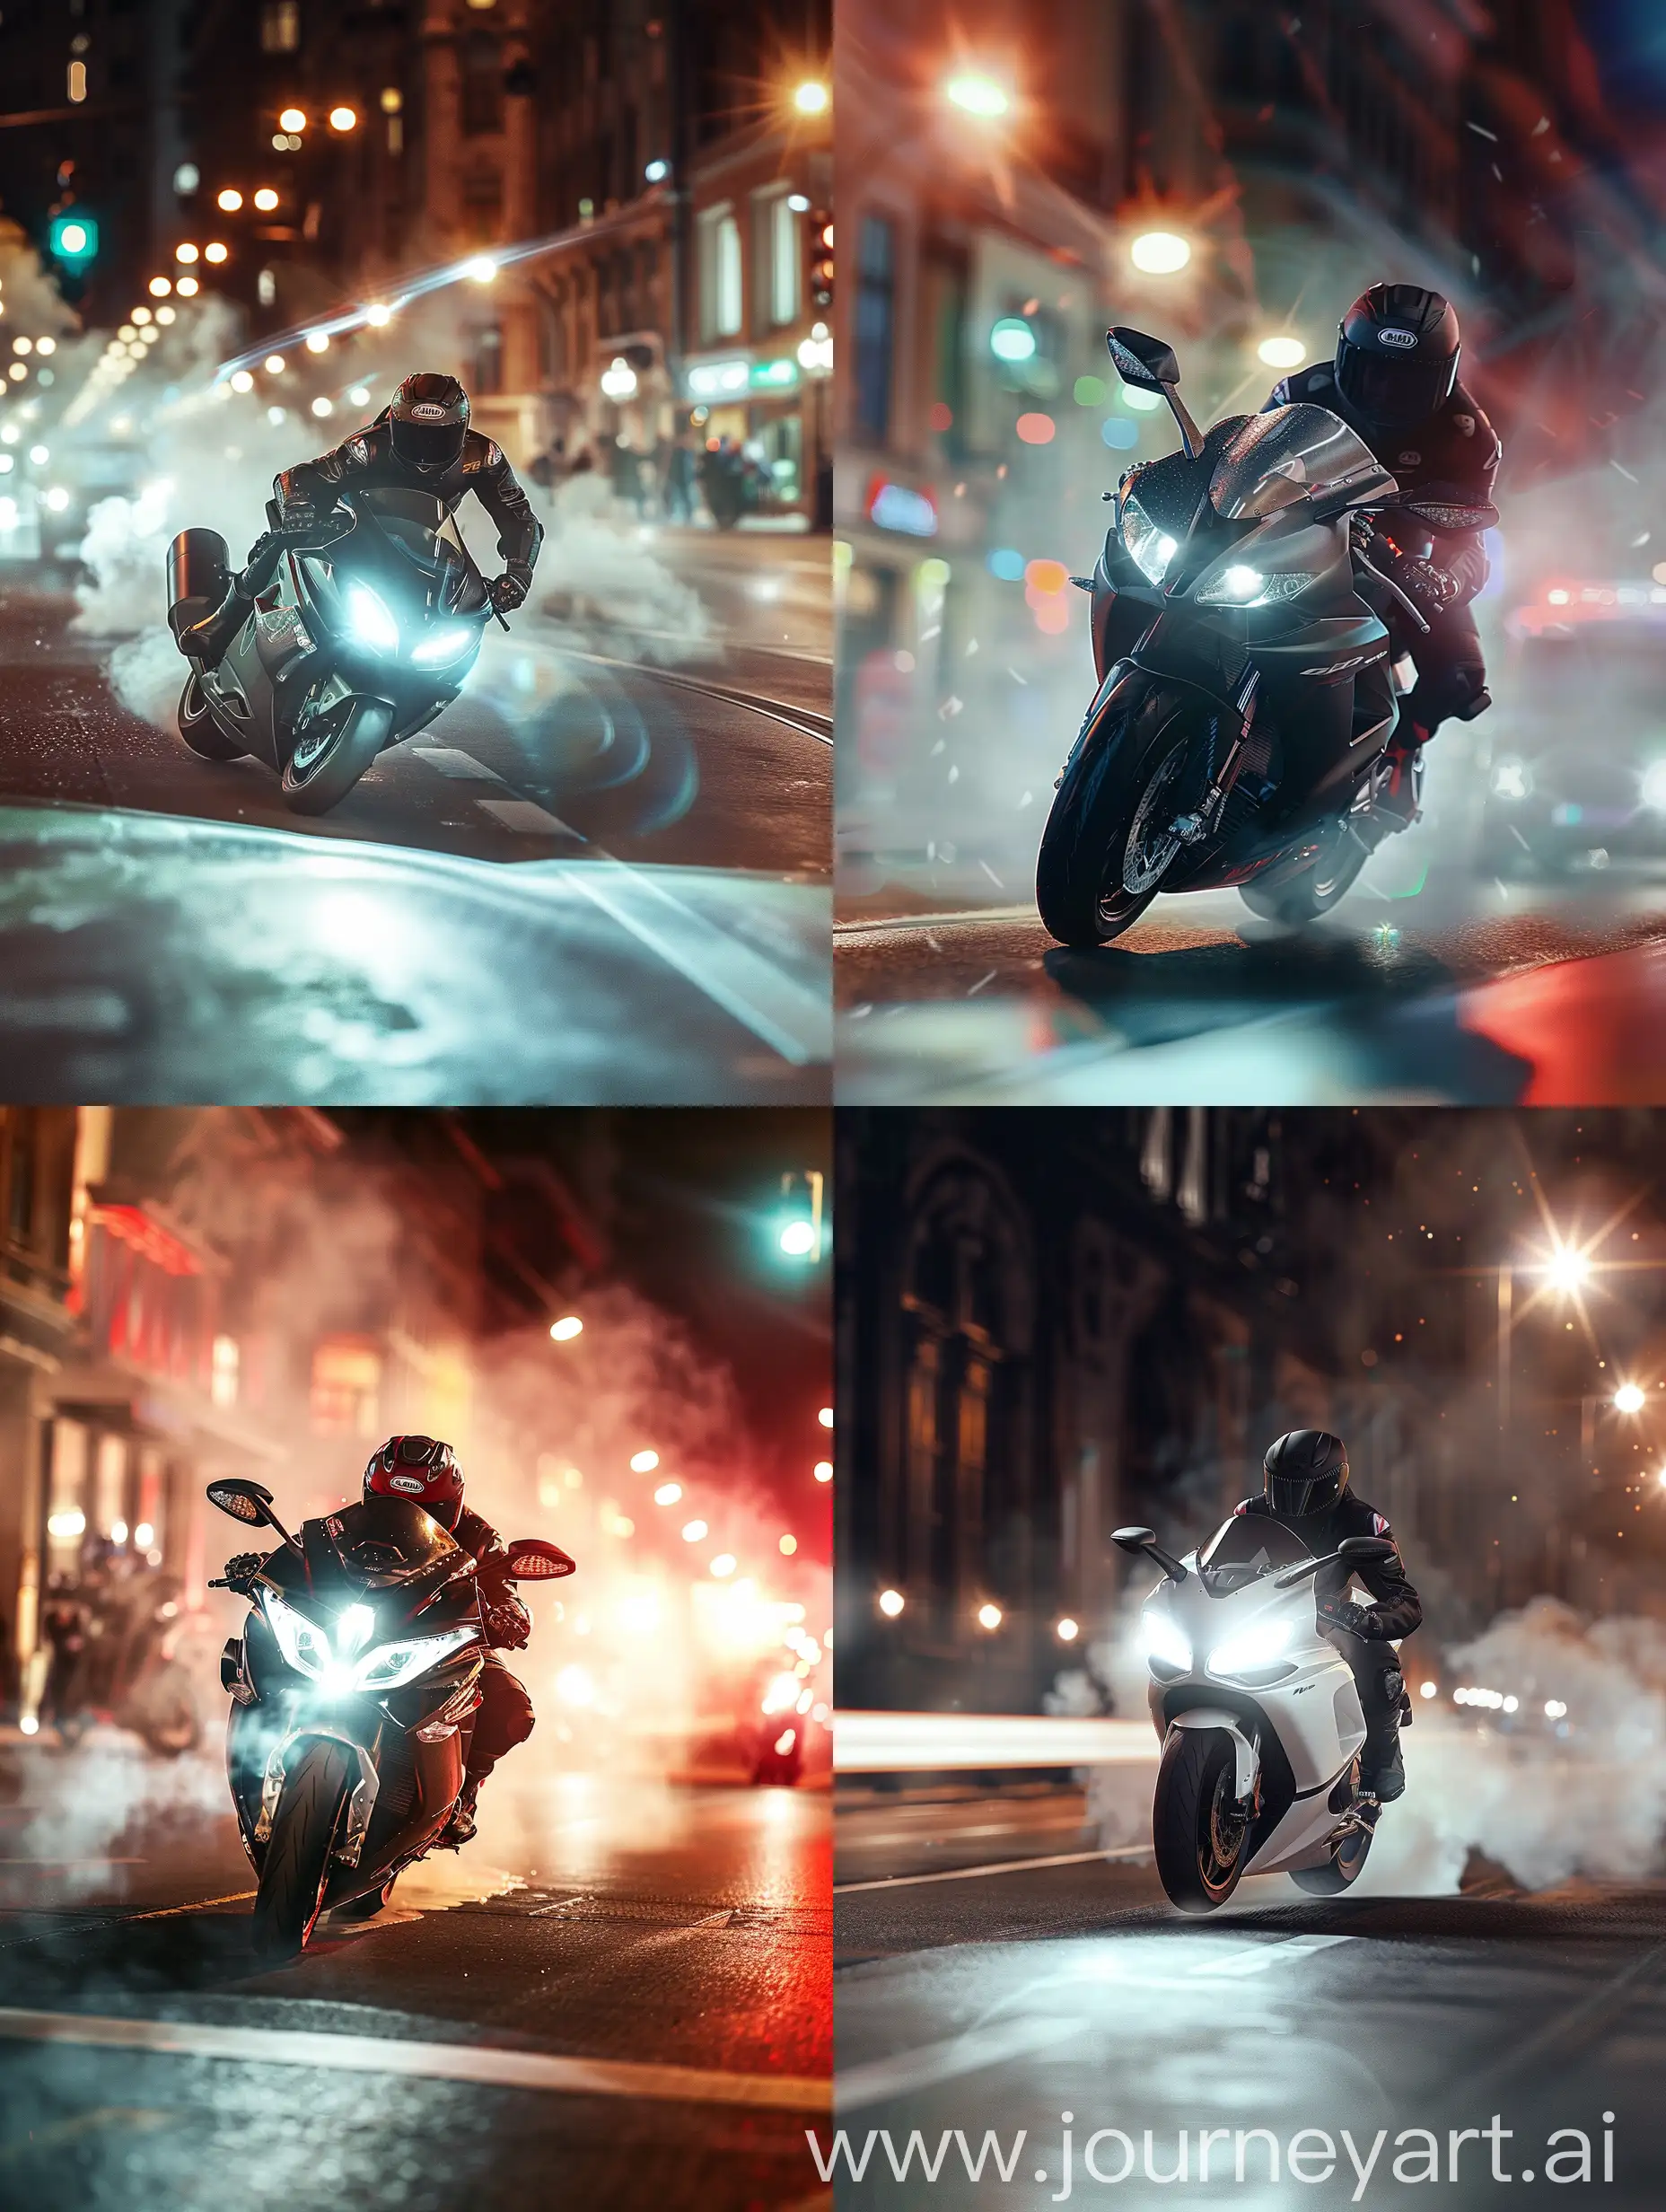 High-Speed-Chase-MV-Agusta-Evading-Police-in-Night-Street-Pursuit